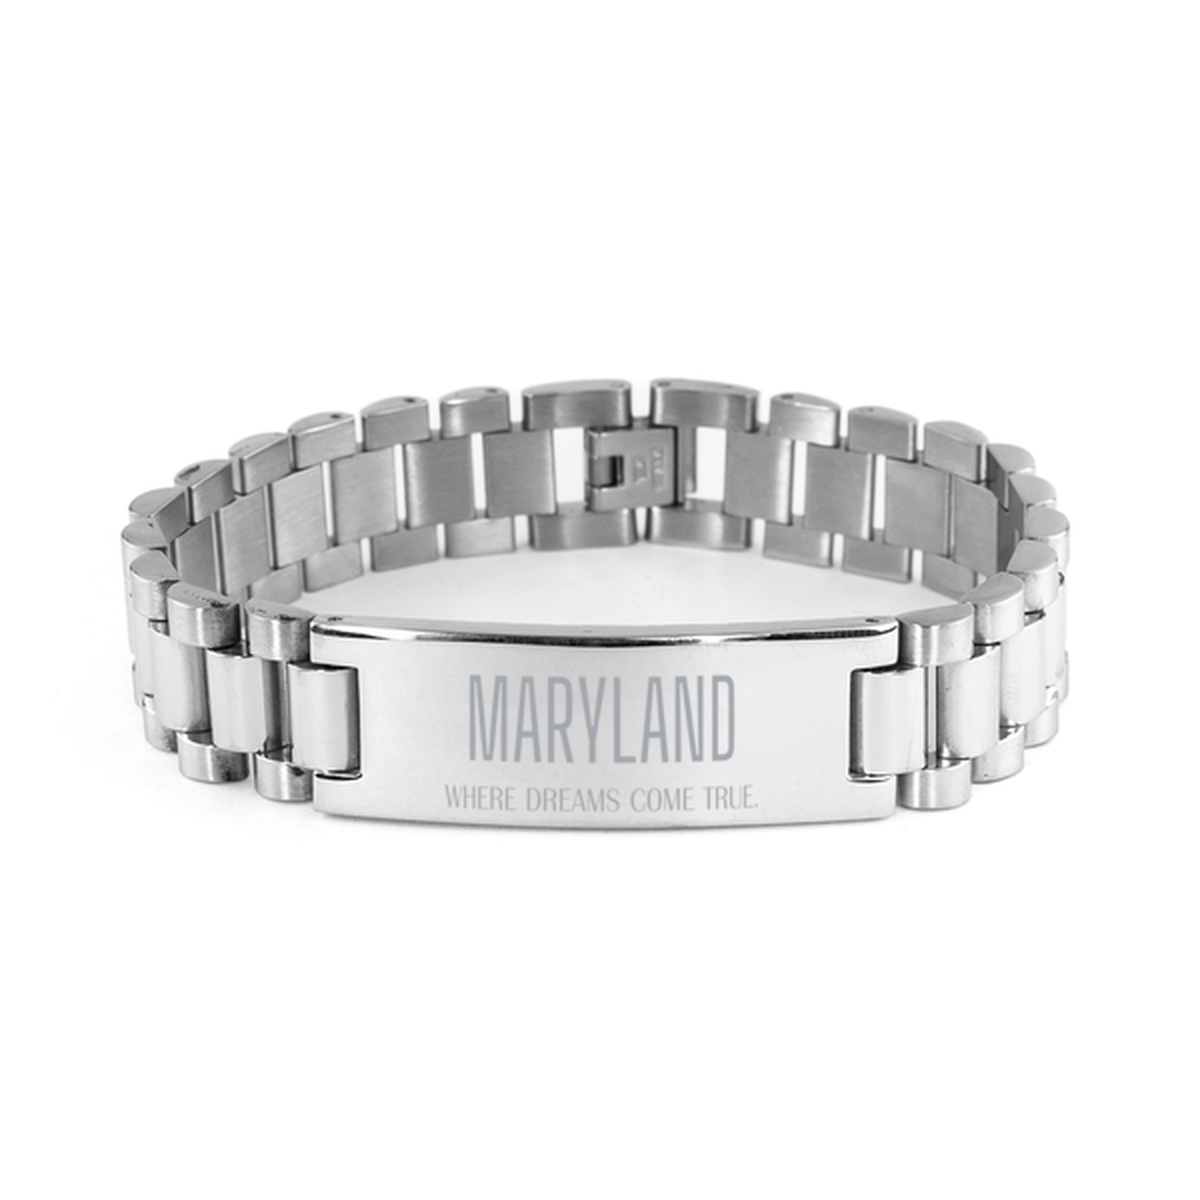 Love Maryland State Ladder Stainless Steel Bracelet, Maryland Where dreams come true, Birthday Inspirational Gifts For Maryland Men, Women, Friends